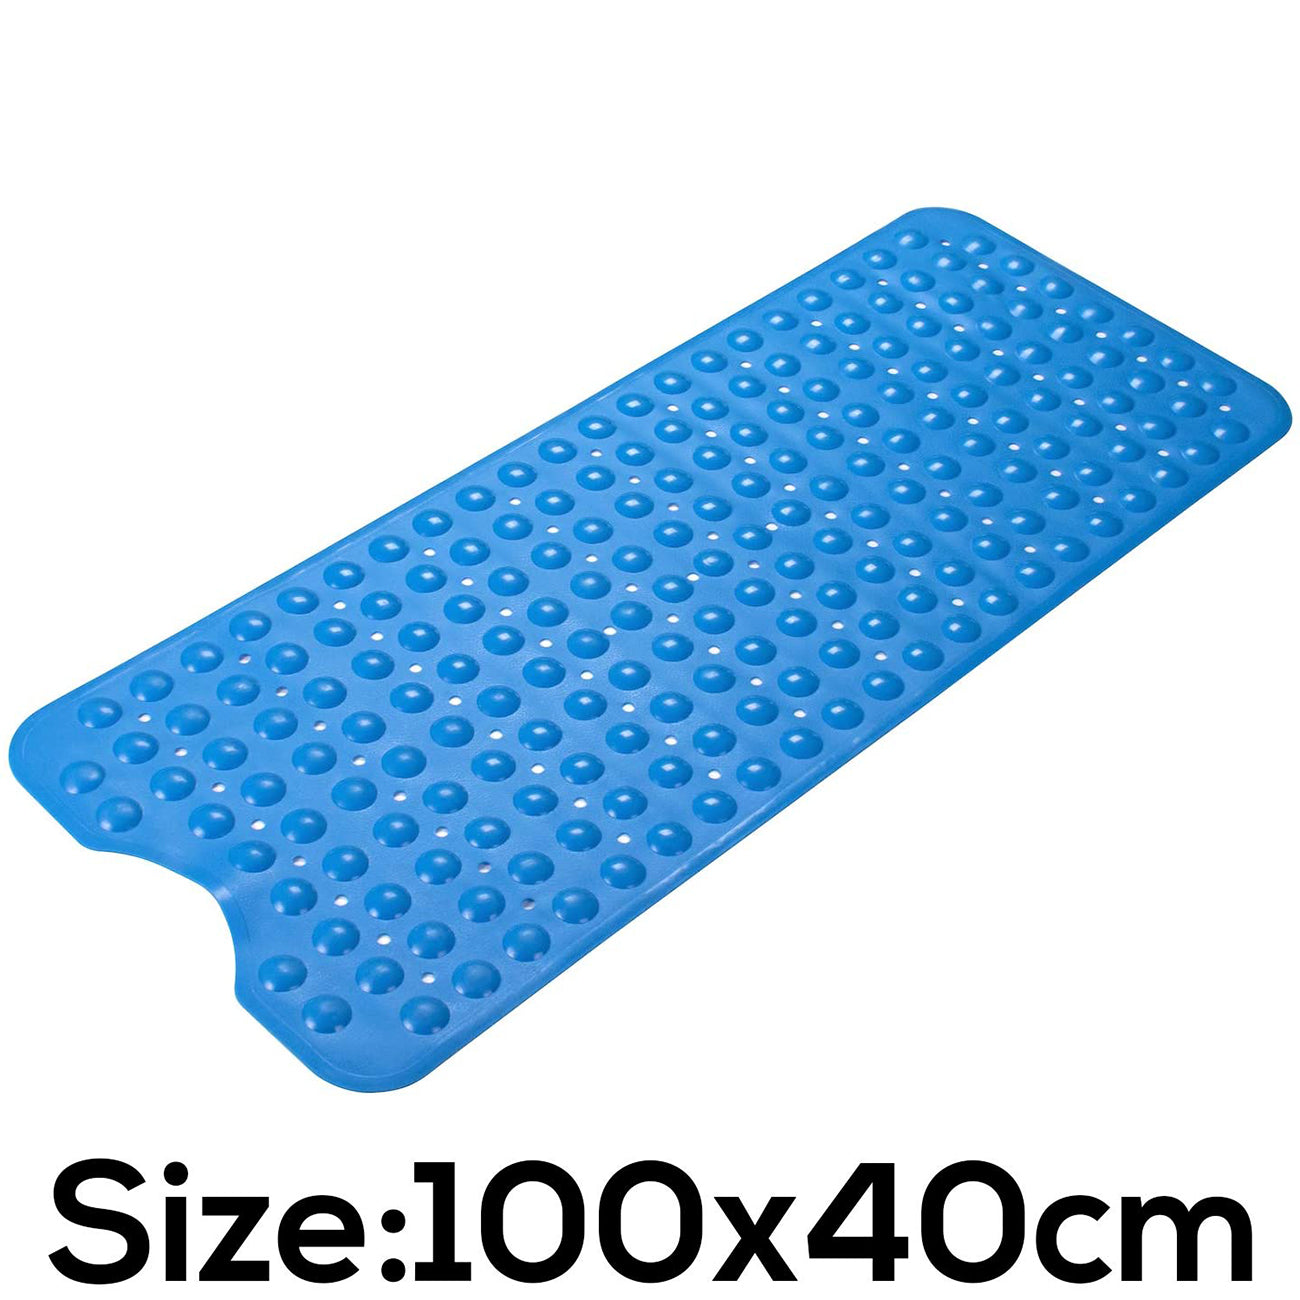 LifeKrafts Experia Anti-Slip with Suction Cup Bath Mat, 100*40cm (Blue Color with Soft-Pebble) LifeKrafts